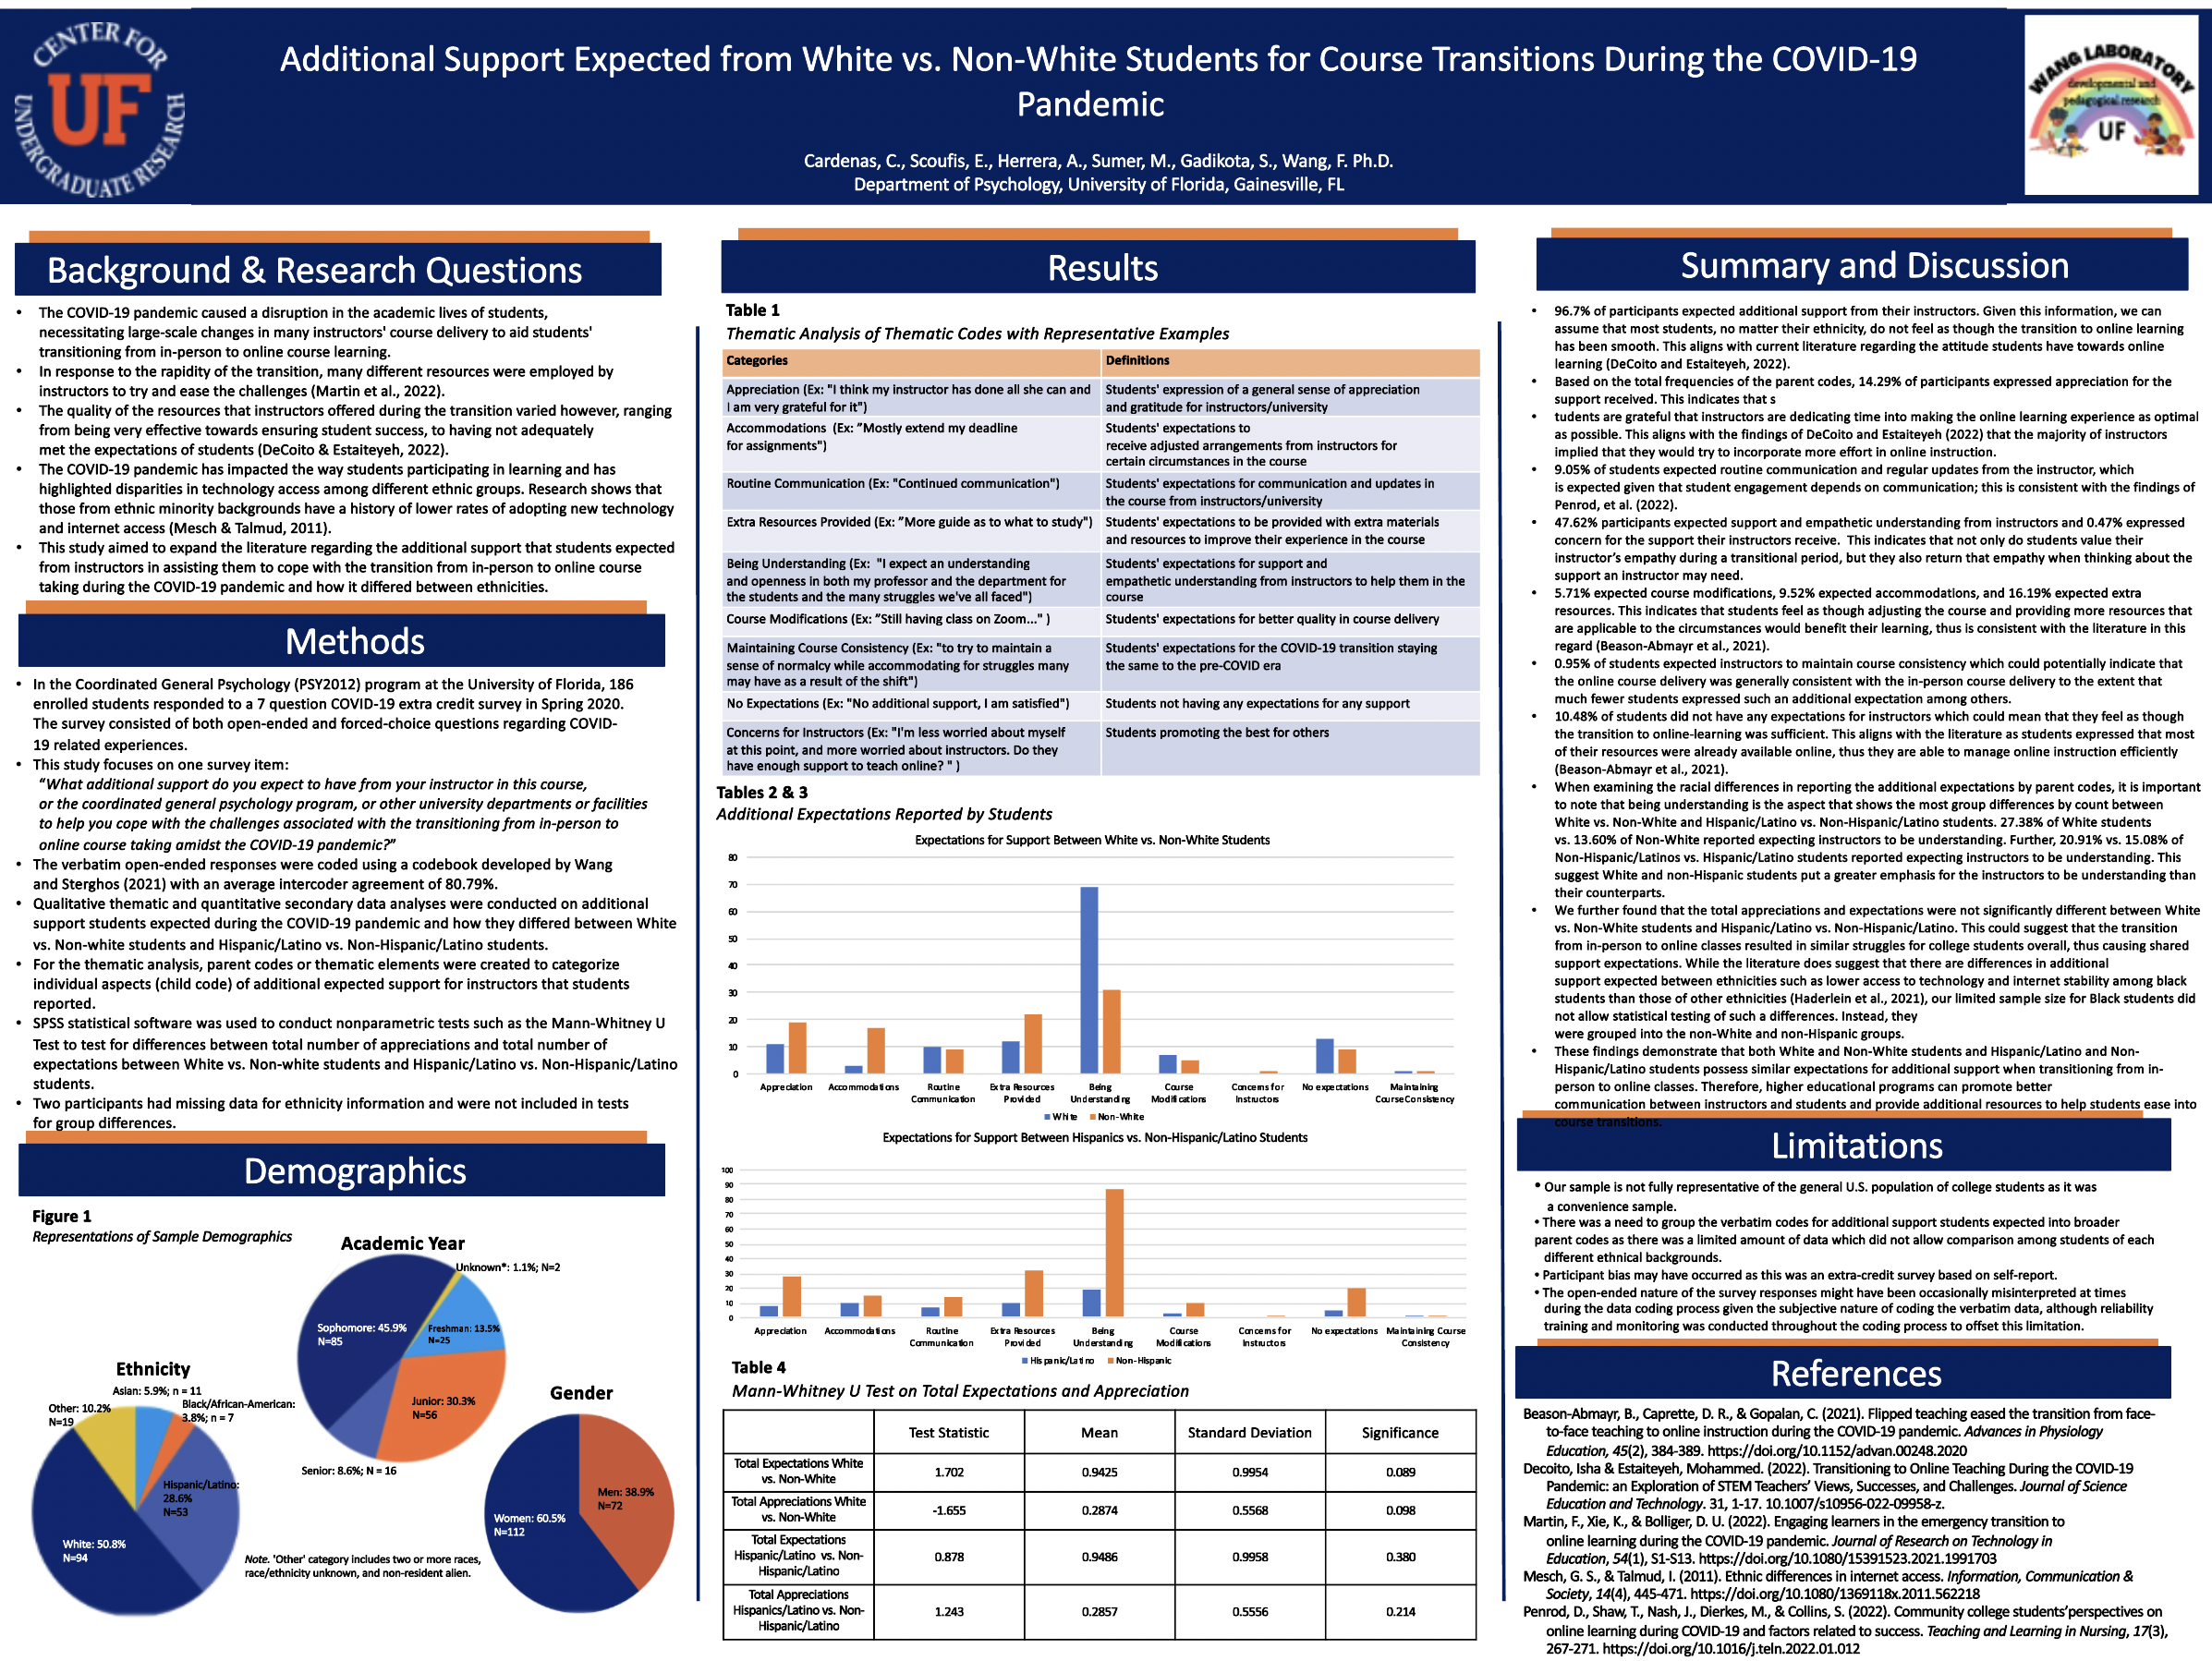 Additional Support Expected from White vs. Non-White Students for Course Transitions During the COVID-19 Pandemic  ​